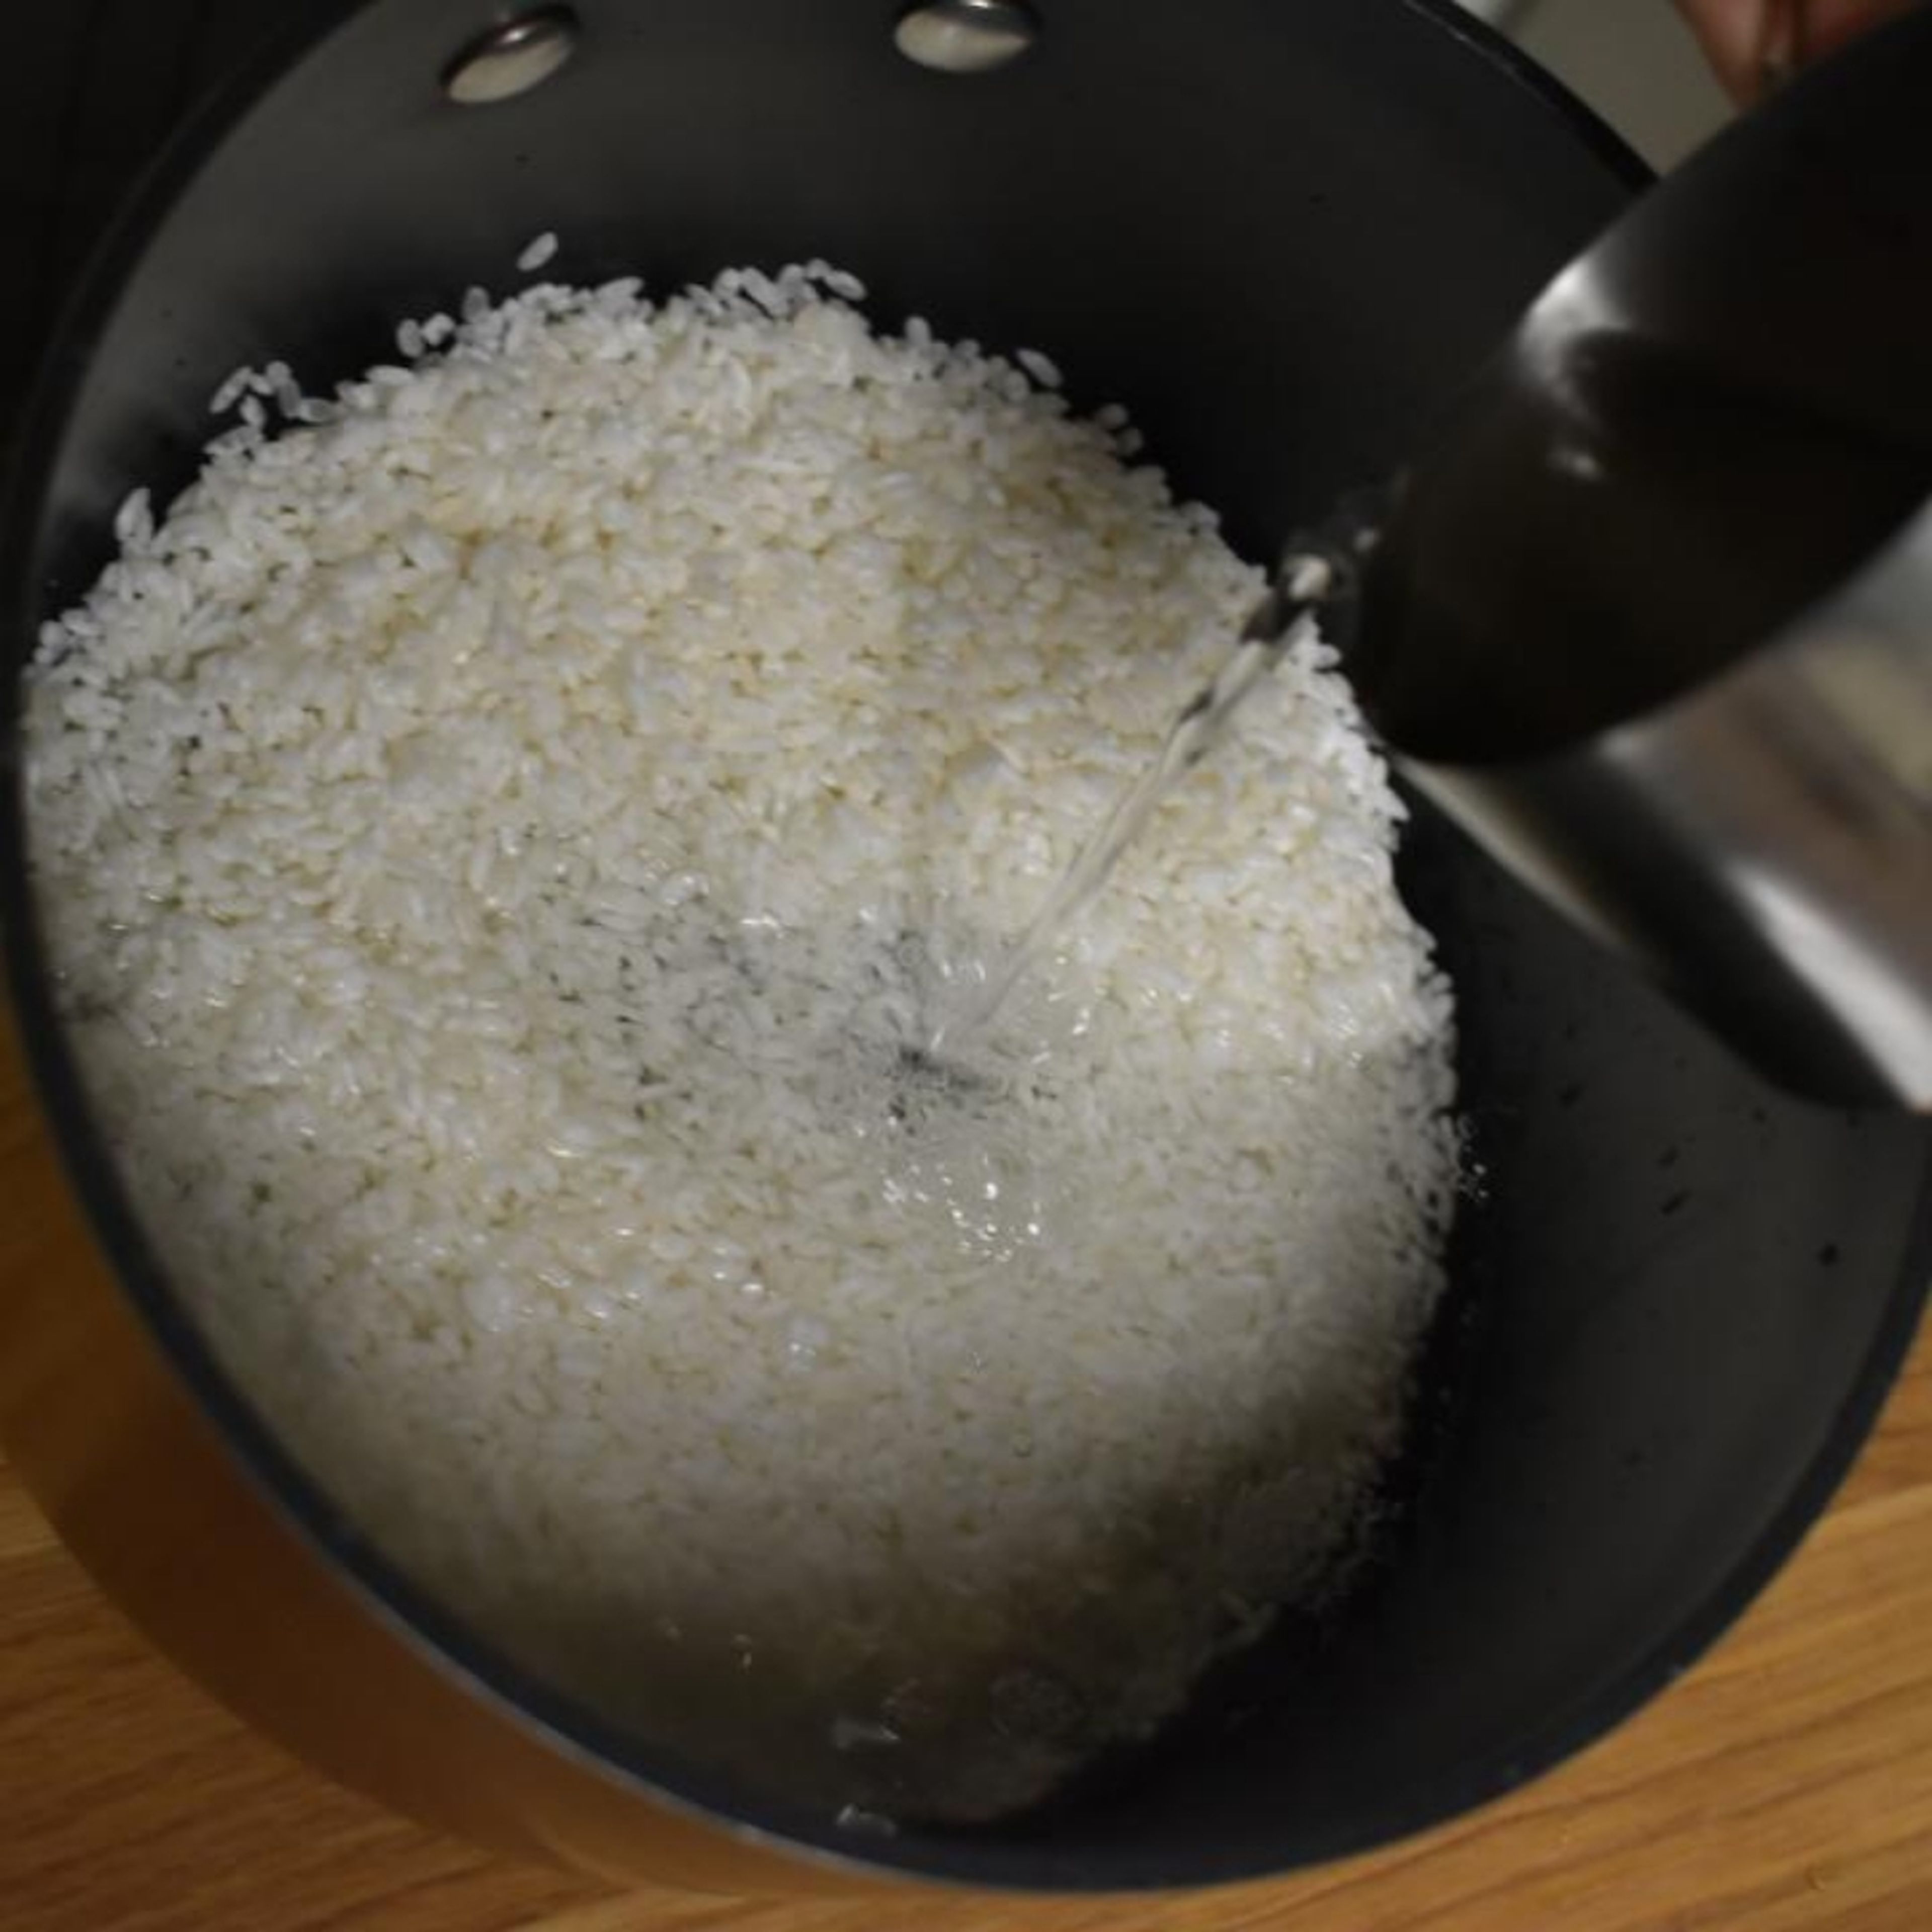 Transfer rice to a pot and add 1 cup of water or just enough to cover it. Bring to a boil. When it starts boiling lower heat to minimum and cover. Let simmer for 15 minutes. Turn off heat and let it rest.